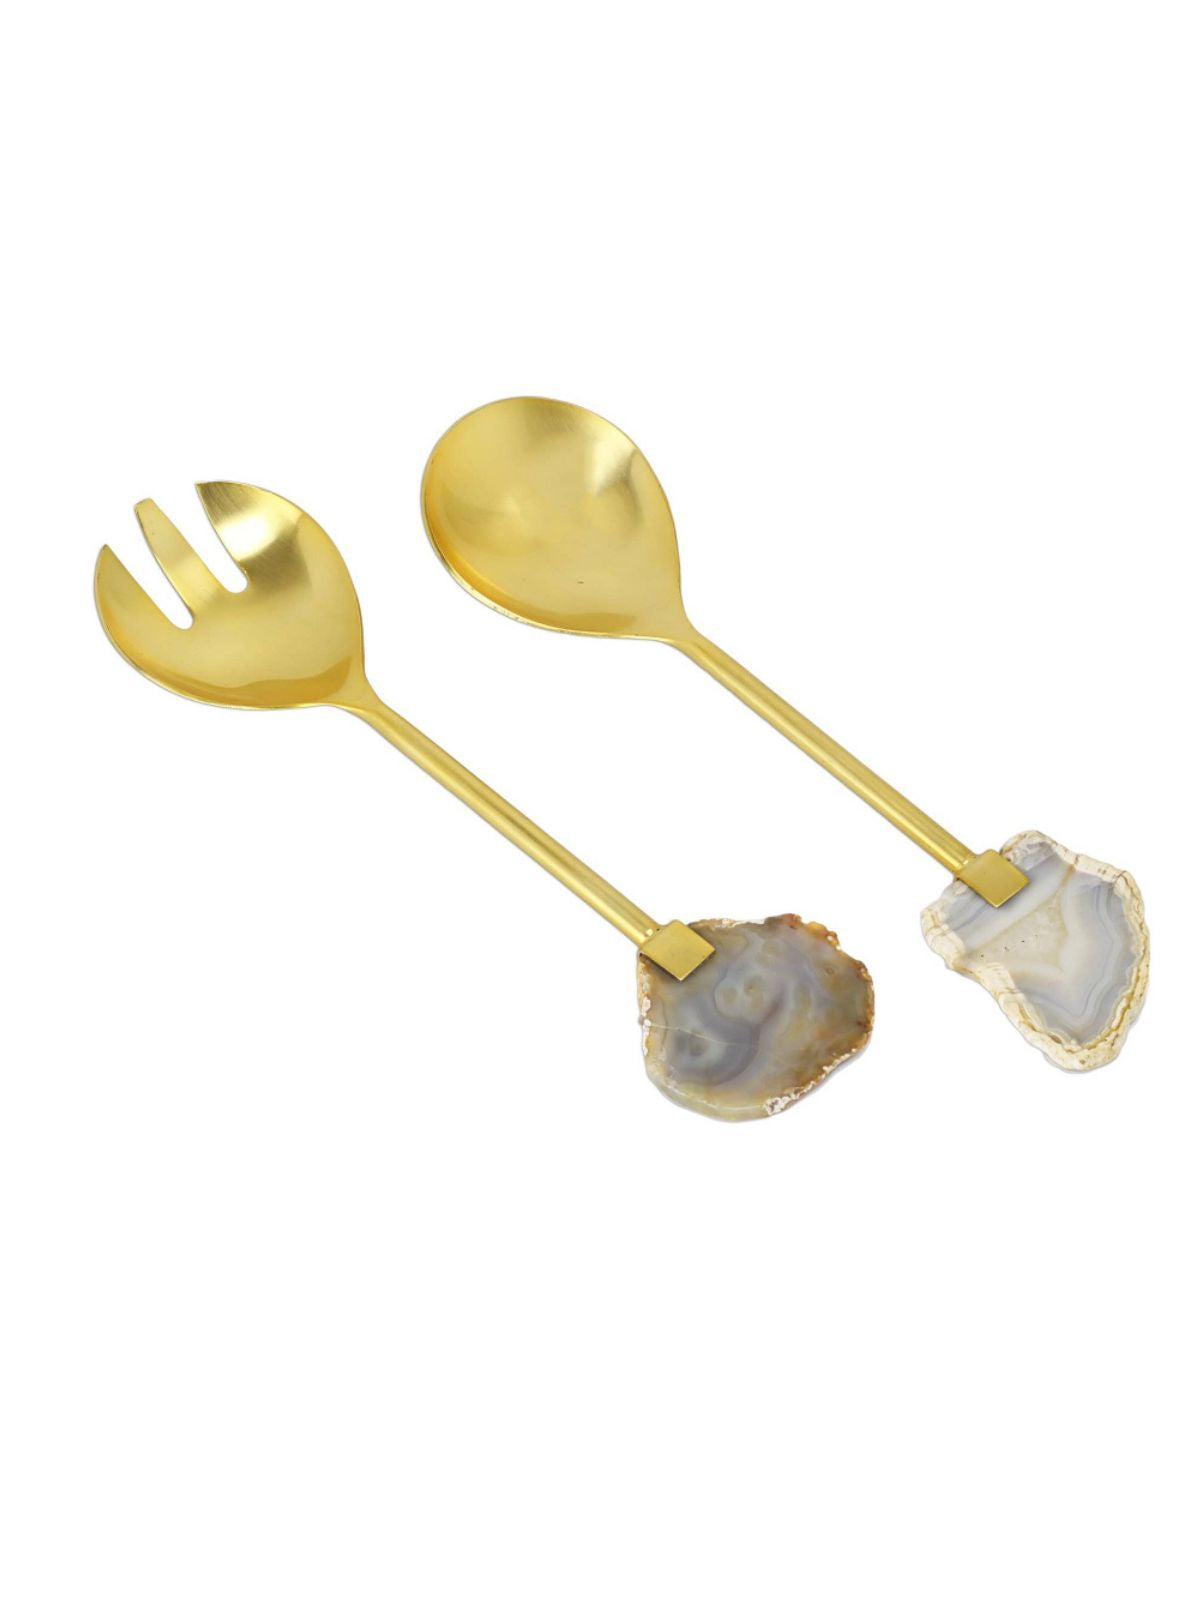 This 2-Piece 18/10 Stainless Steel Salad Serving Set will add sophistication and elegance to any occasion with a golden finish and natural agate stones at the ends for flair. Sold by KYA Home Decor